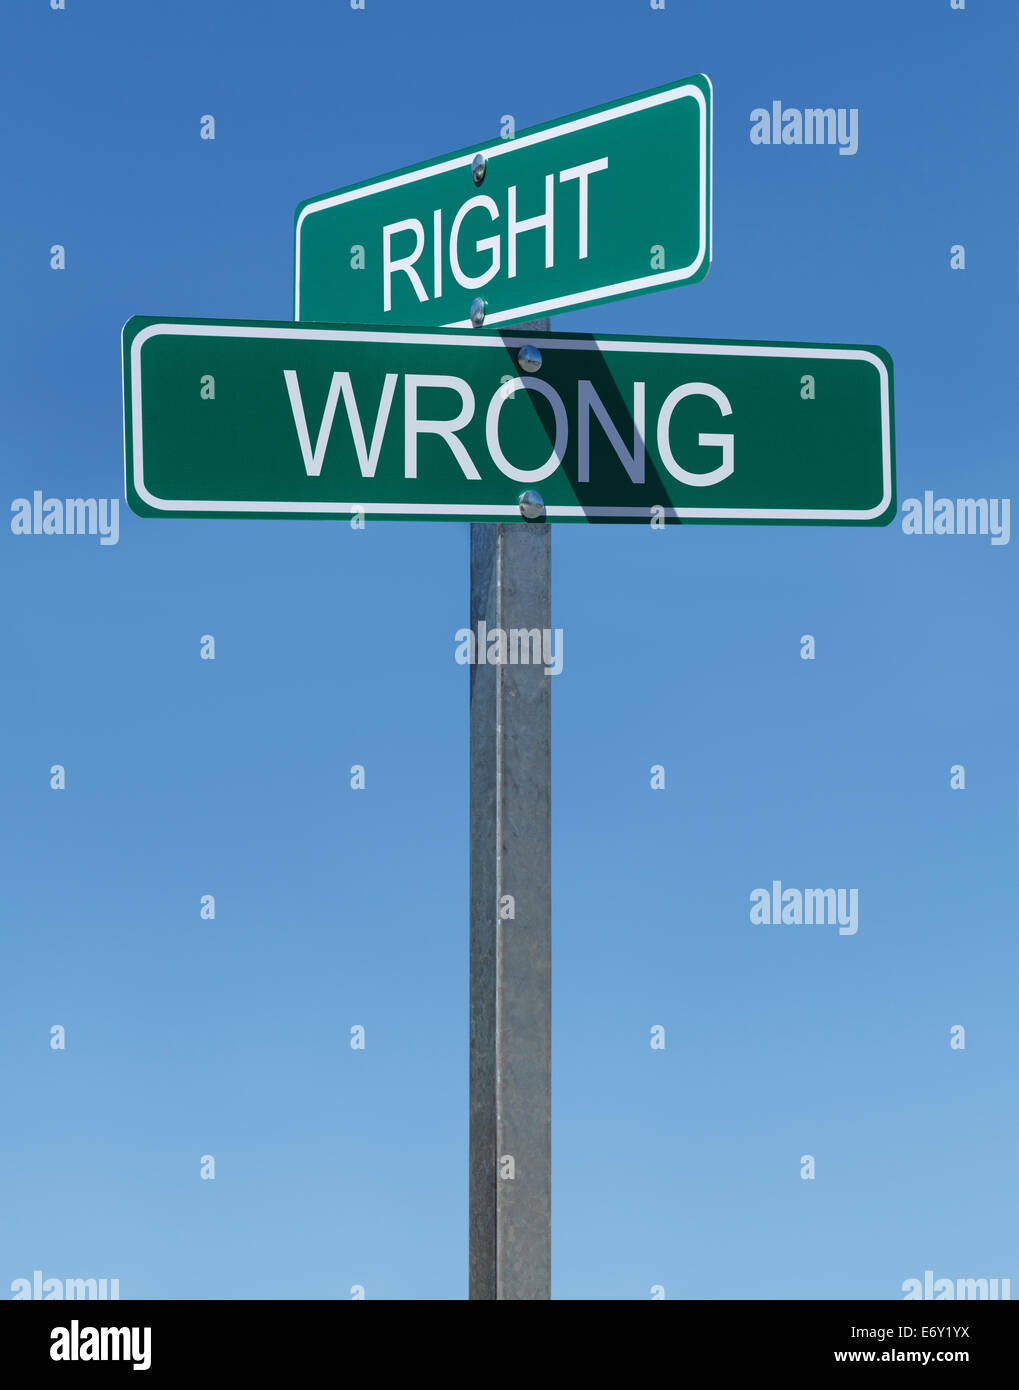 Two Green Street Signs Right and Wrong on Metal Pole with Blue Sky Background. Stock Photo